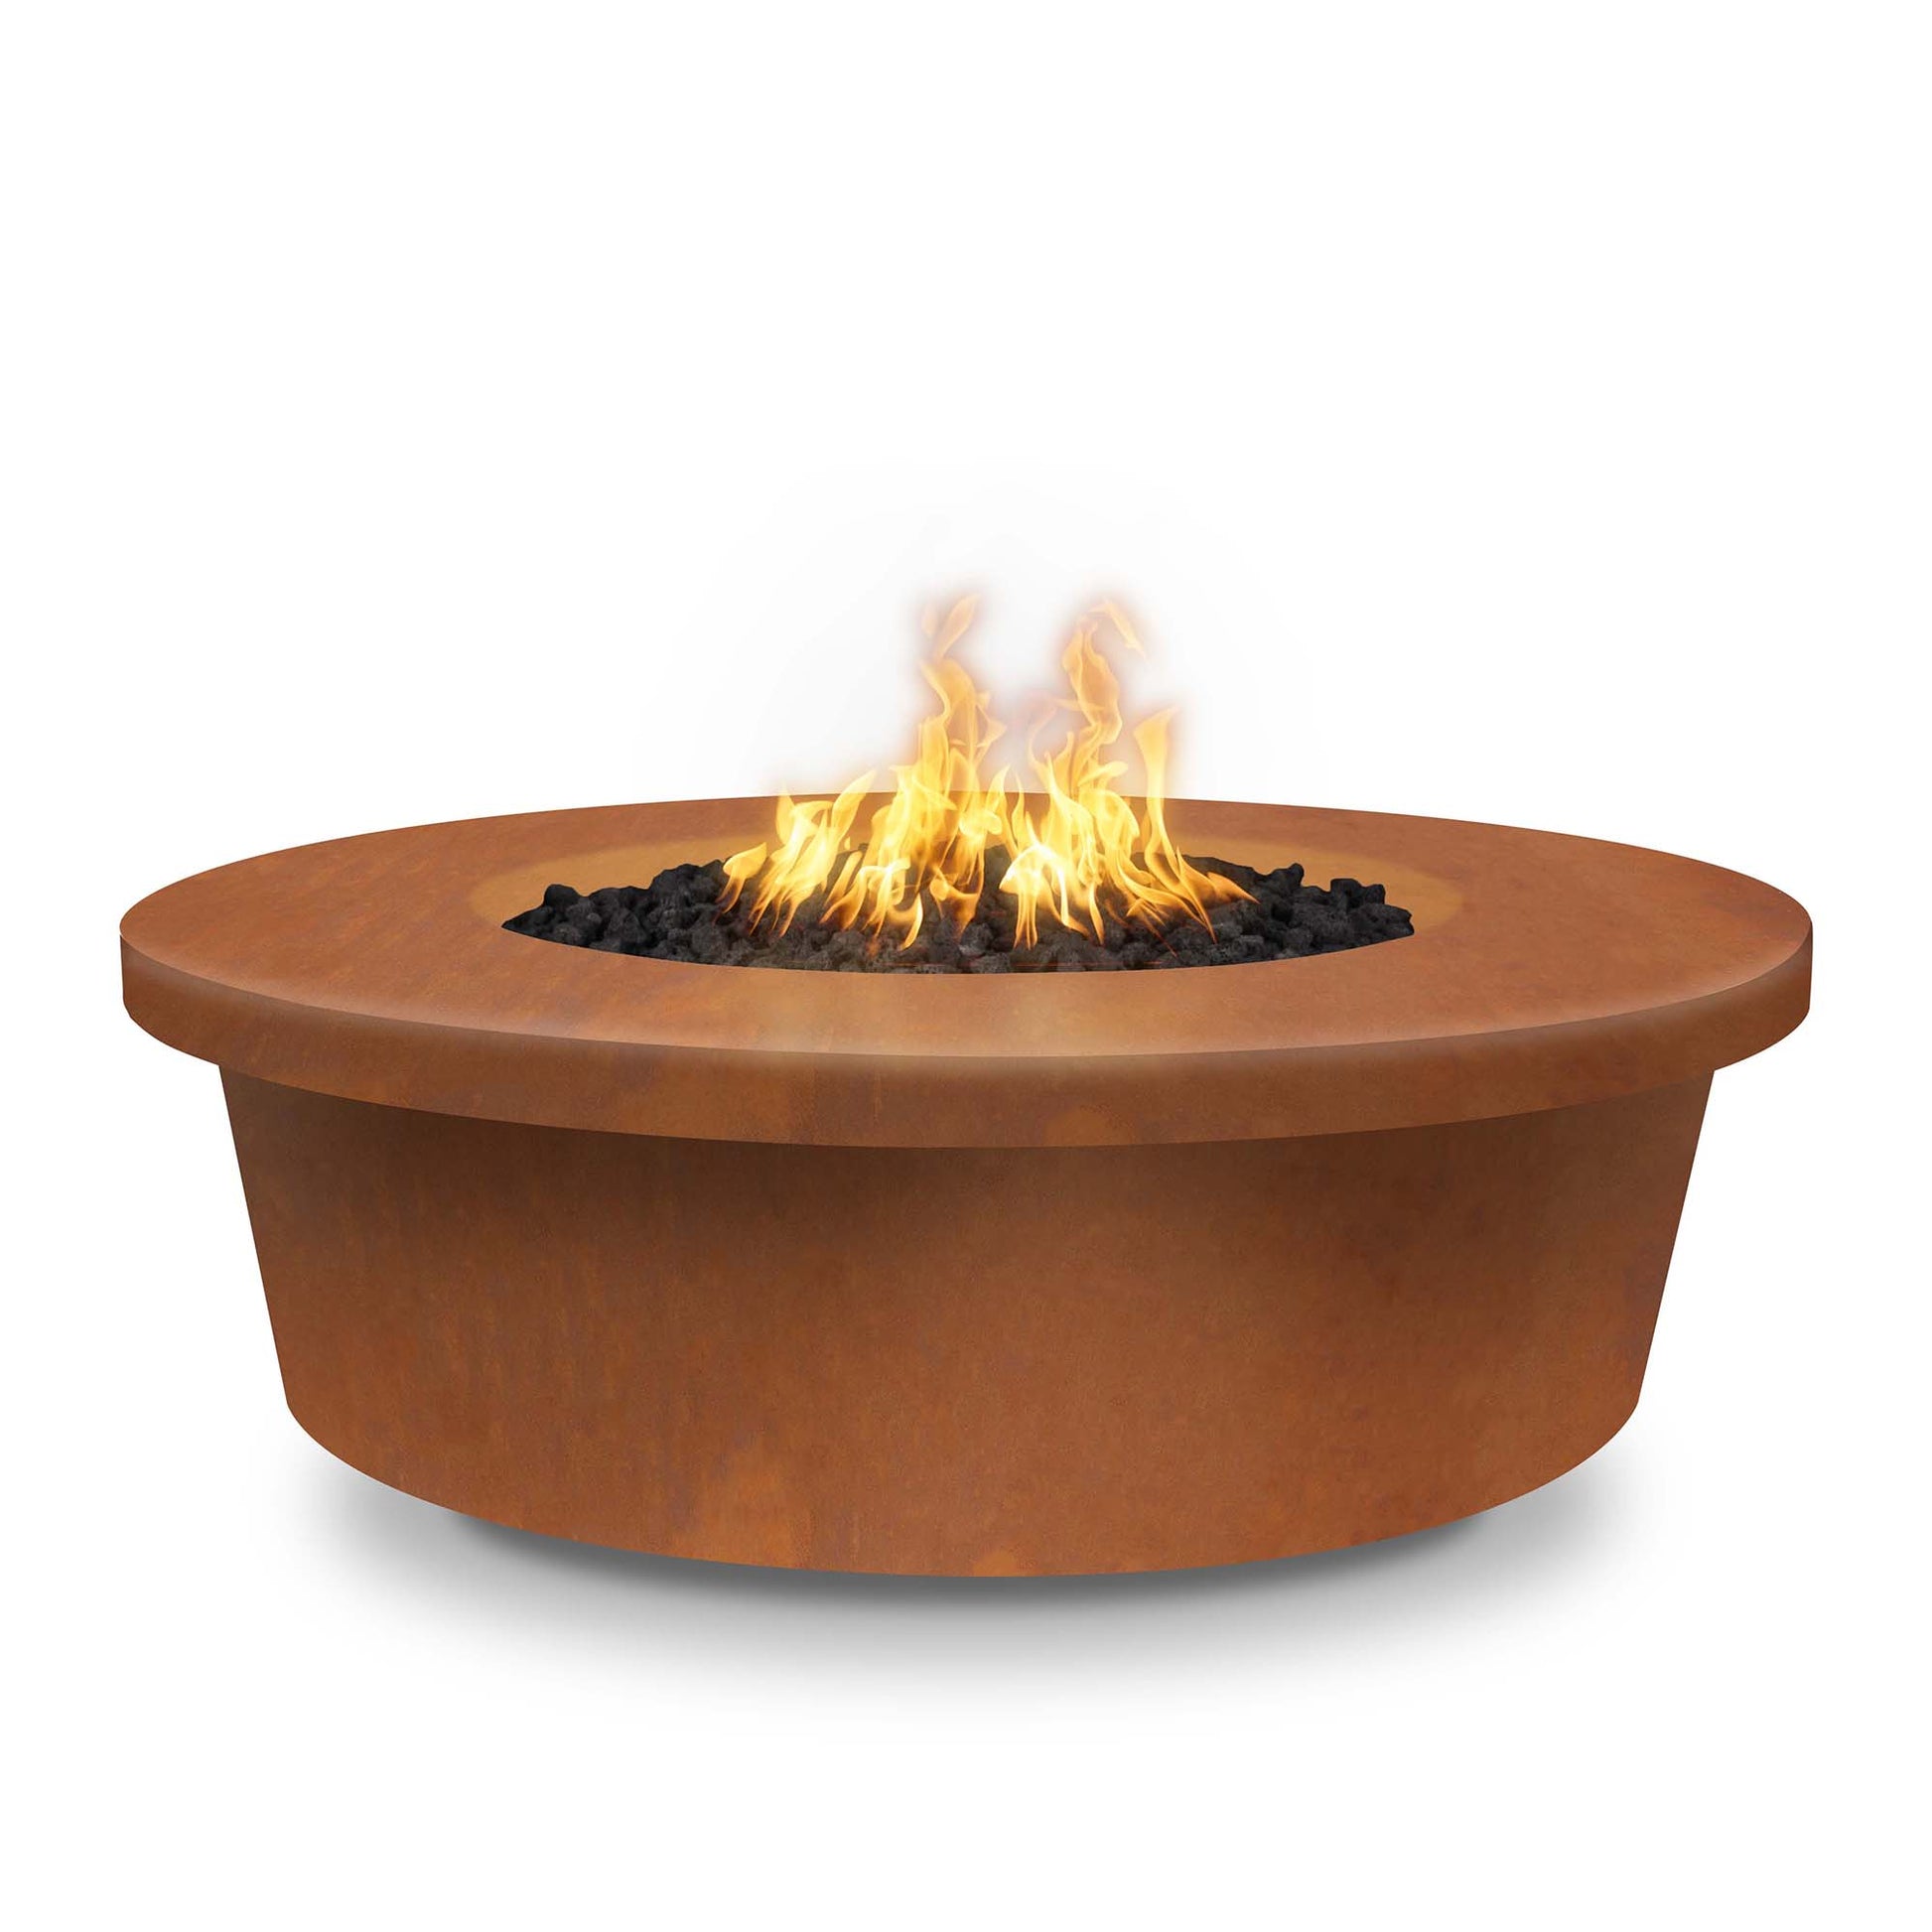 The Outdoor Plus Round Tempe 48" Hammered Copper Natural Gas Fire Pit with Match Lit Ignition